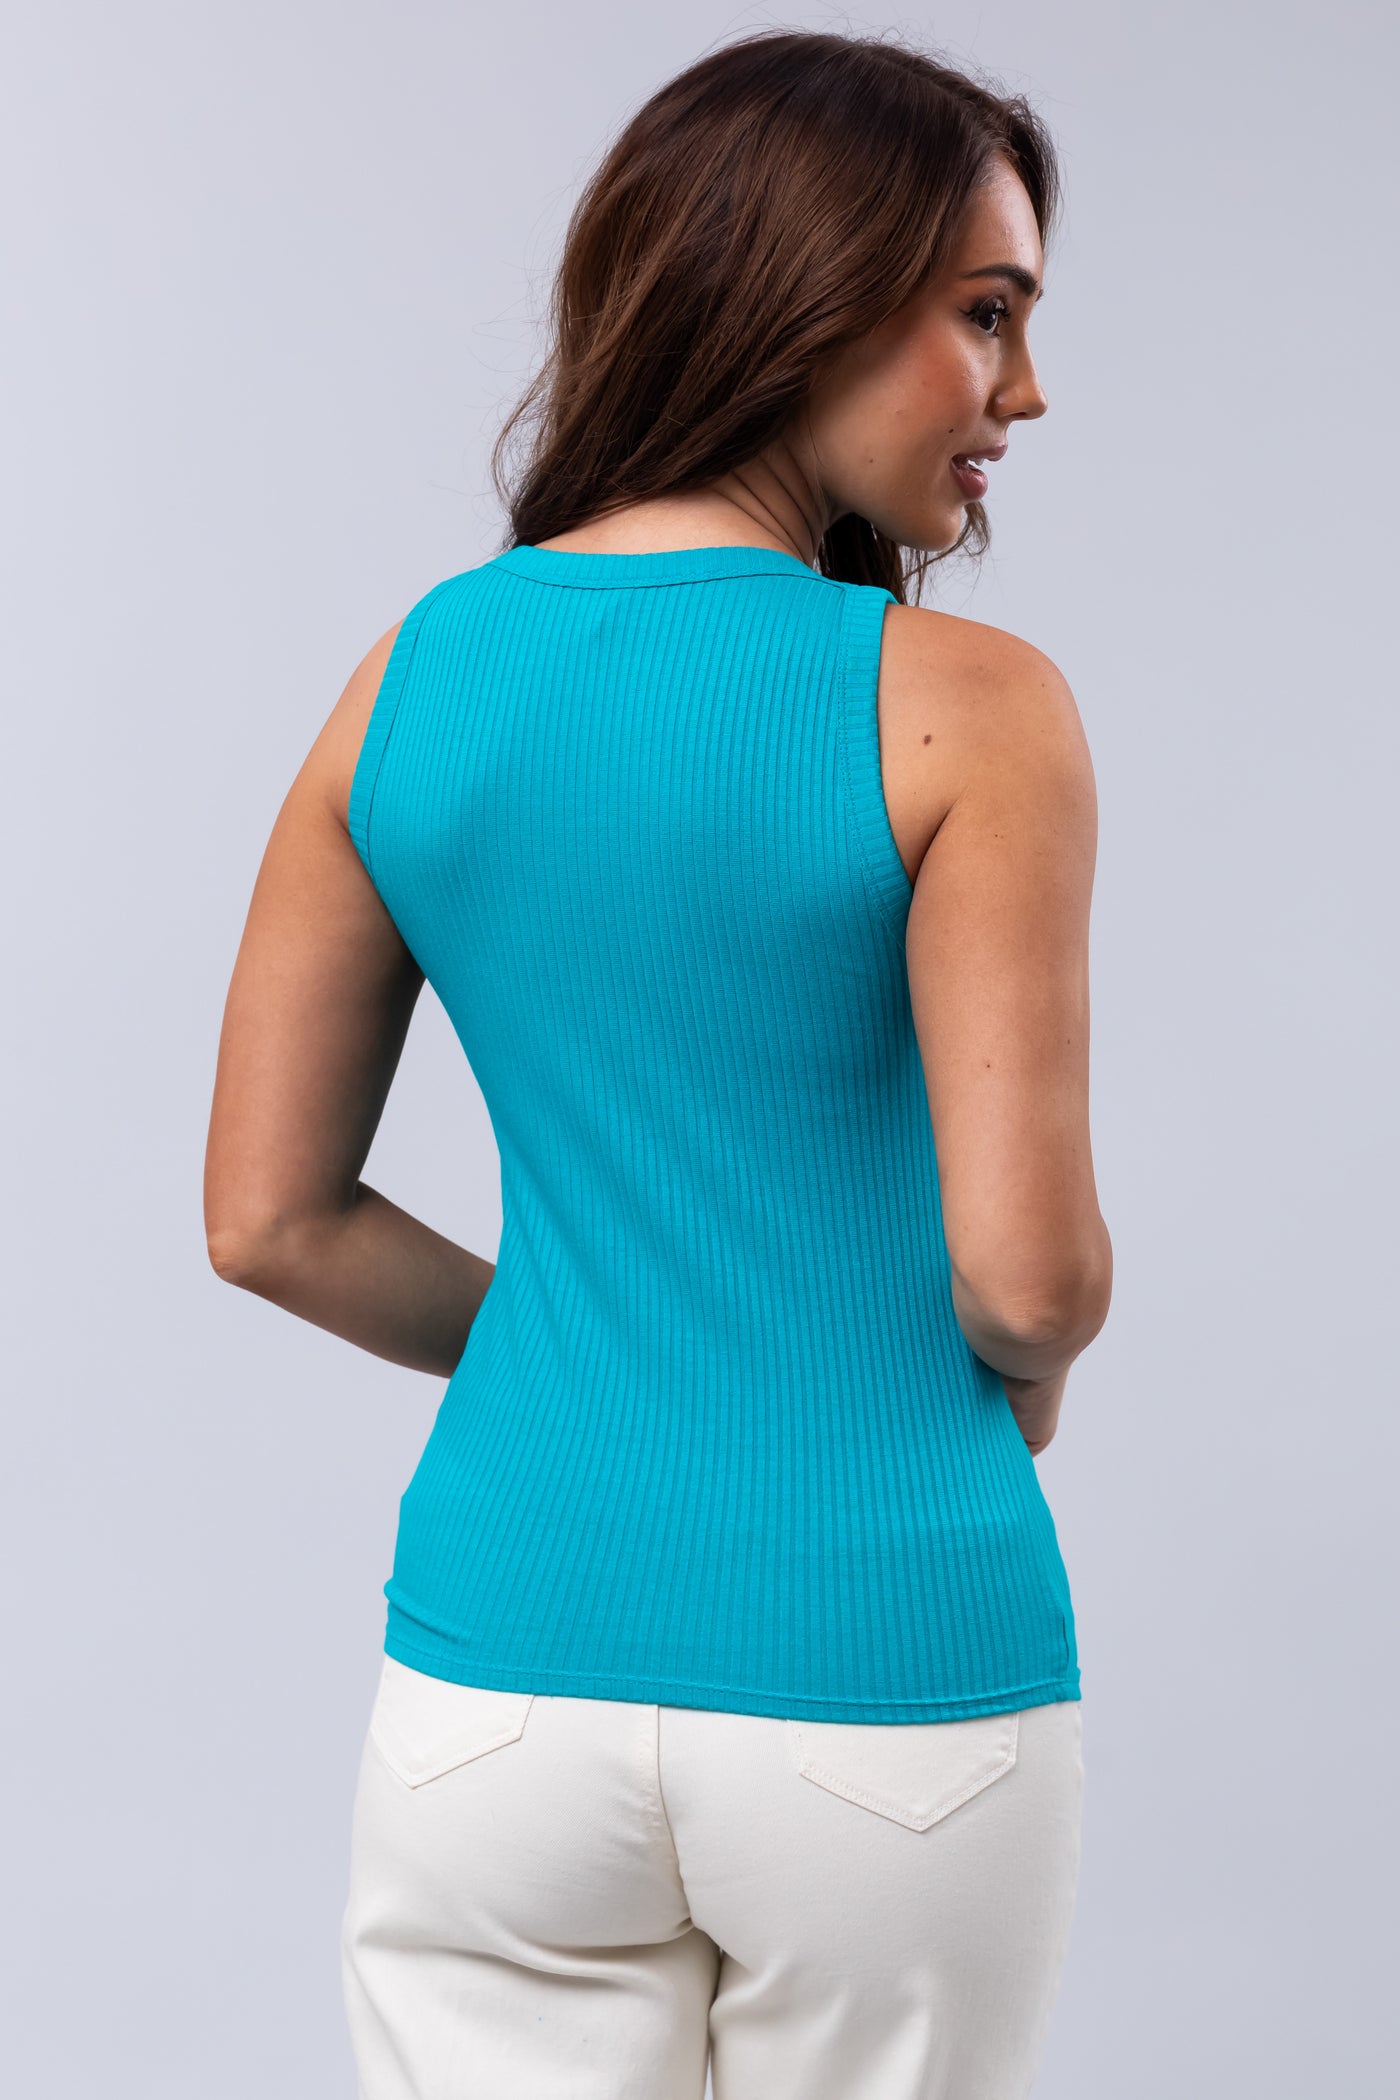 Vibrant Teal Ribbed Fitted Tank Top